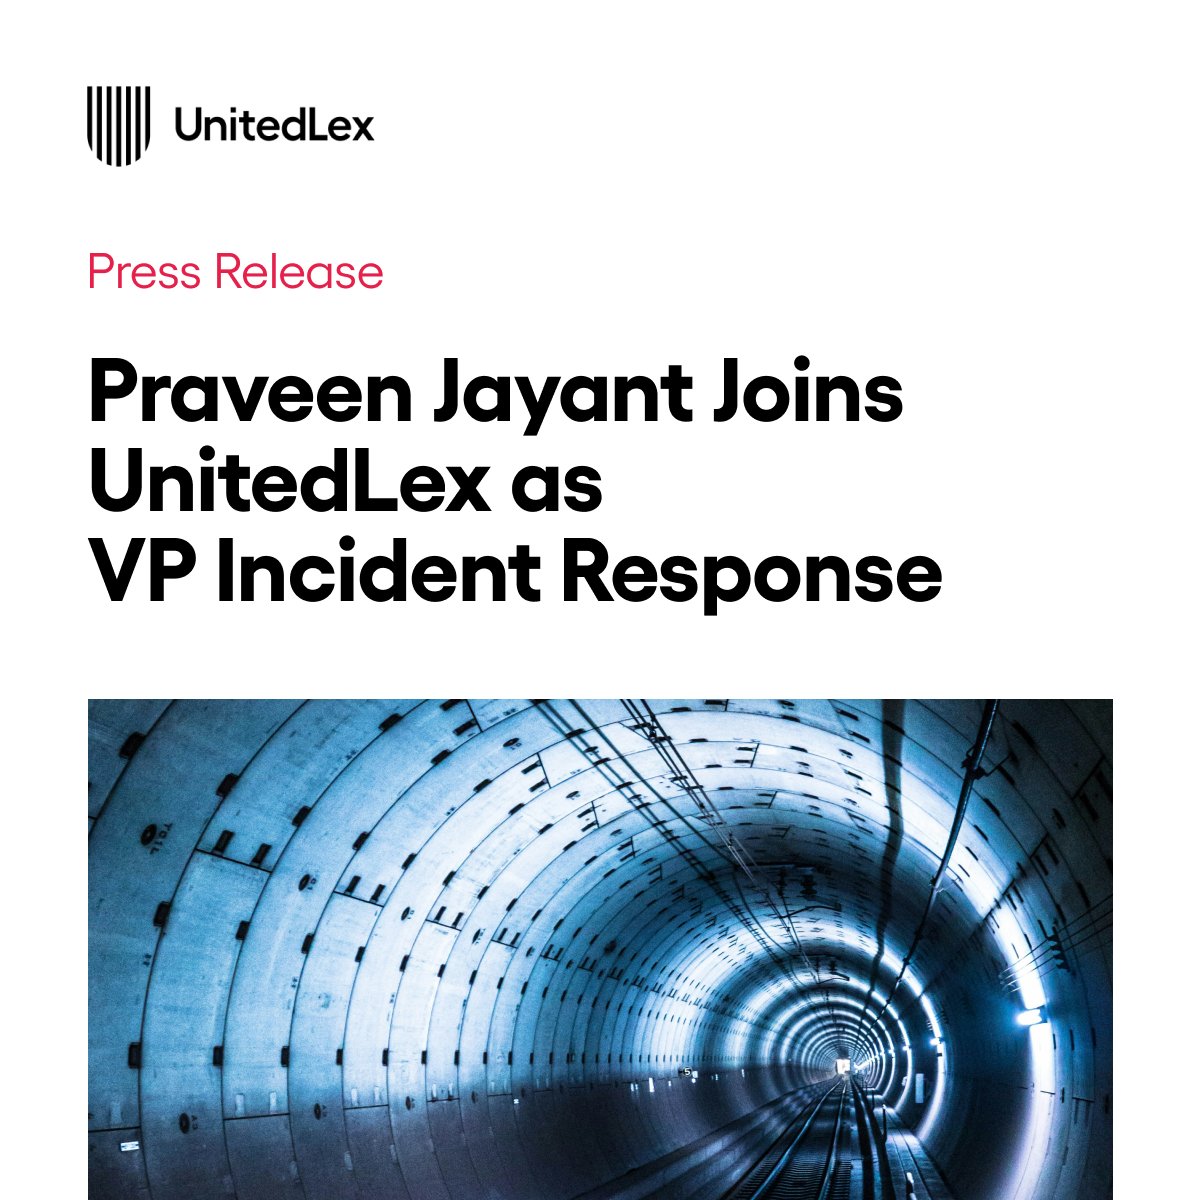 “Praveen’s extensive experience in incident response, data services, and operations made him a natural fit to lead our team.” Read the release on UnitedLex hiring Praveen Jayant to lead its incident response team: hubs.li/Q02hNy6r0 #incidentresponse #growth #team #India